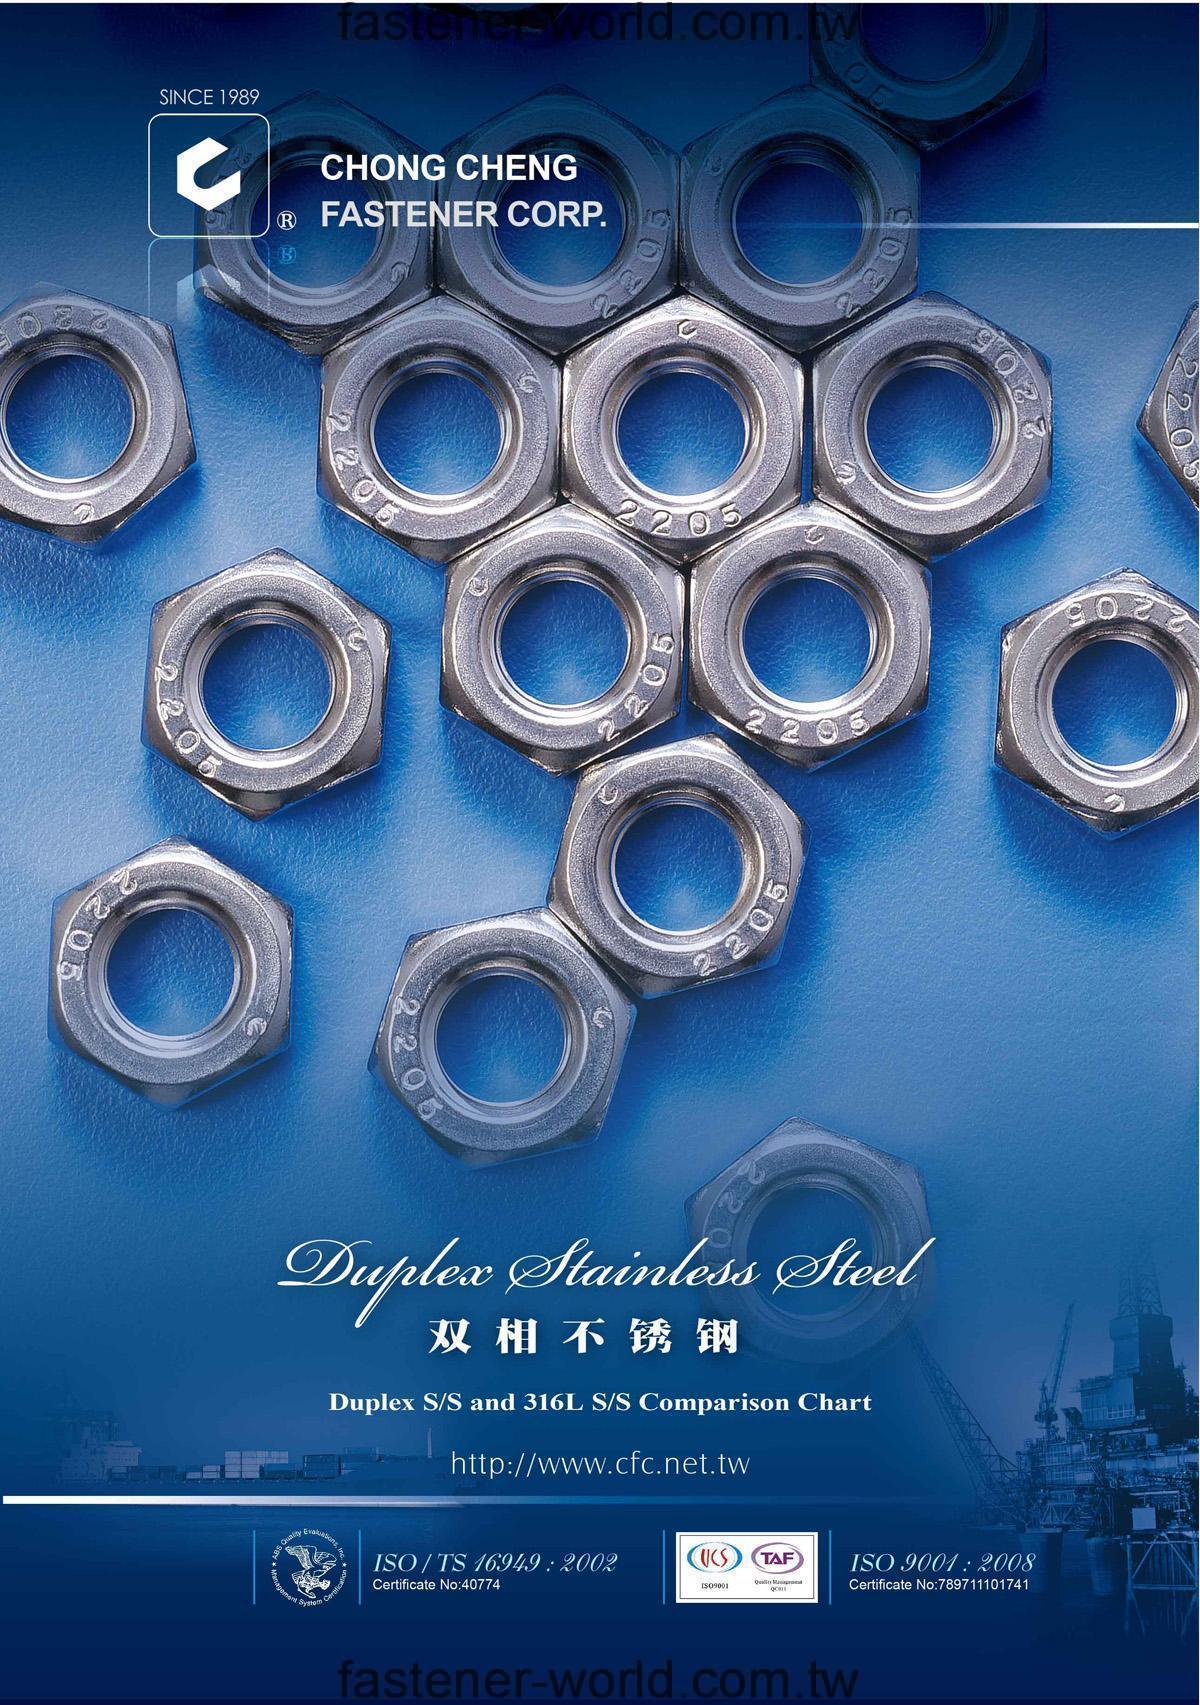 CHONG CHENG FASTENER CORP. (CFC) Online Catalogues